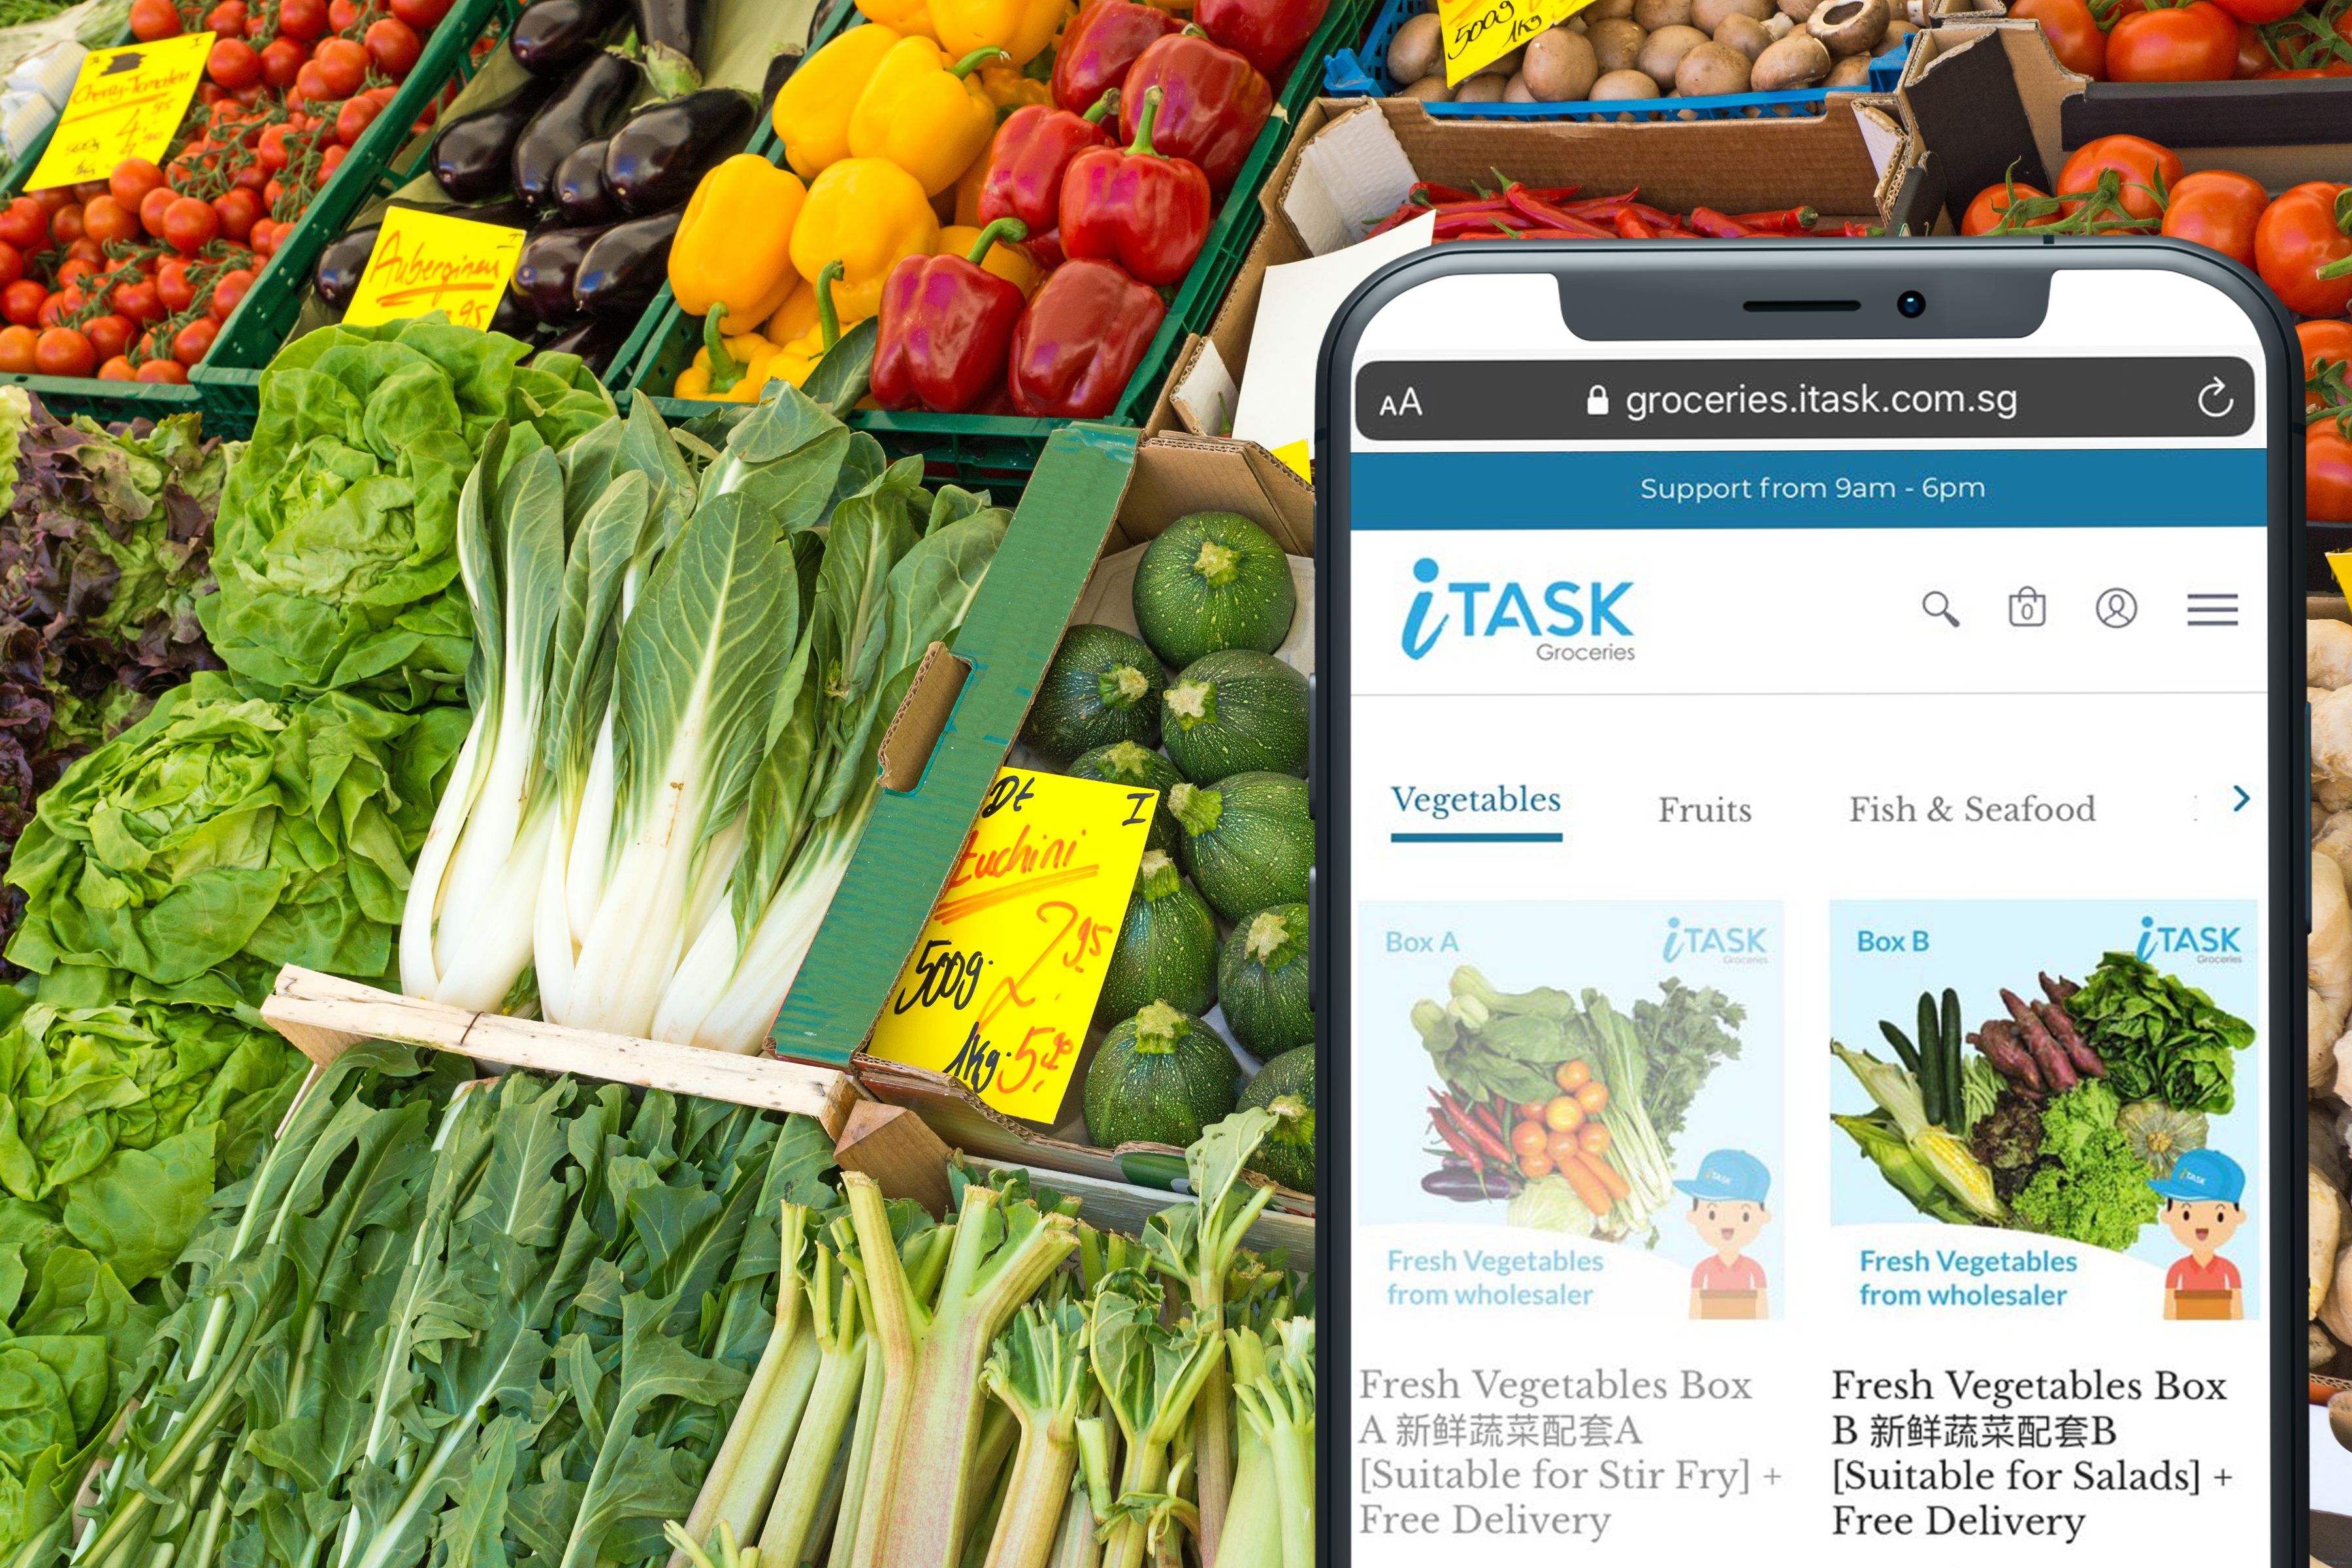 Let your elderly parents stay at home by ordering fresh produce with iTask Groceries